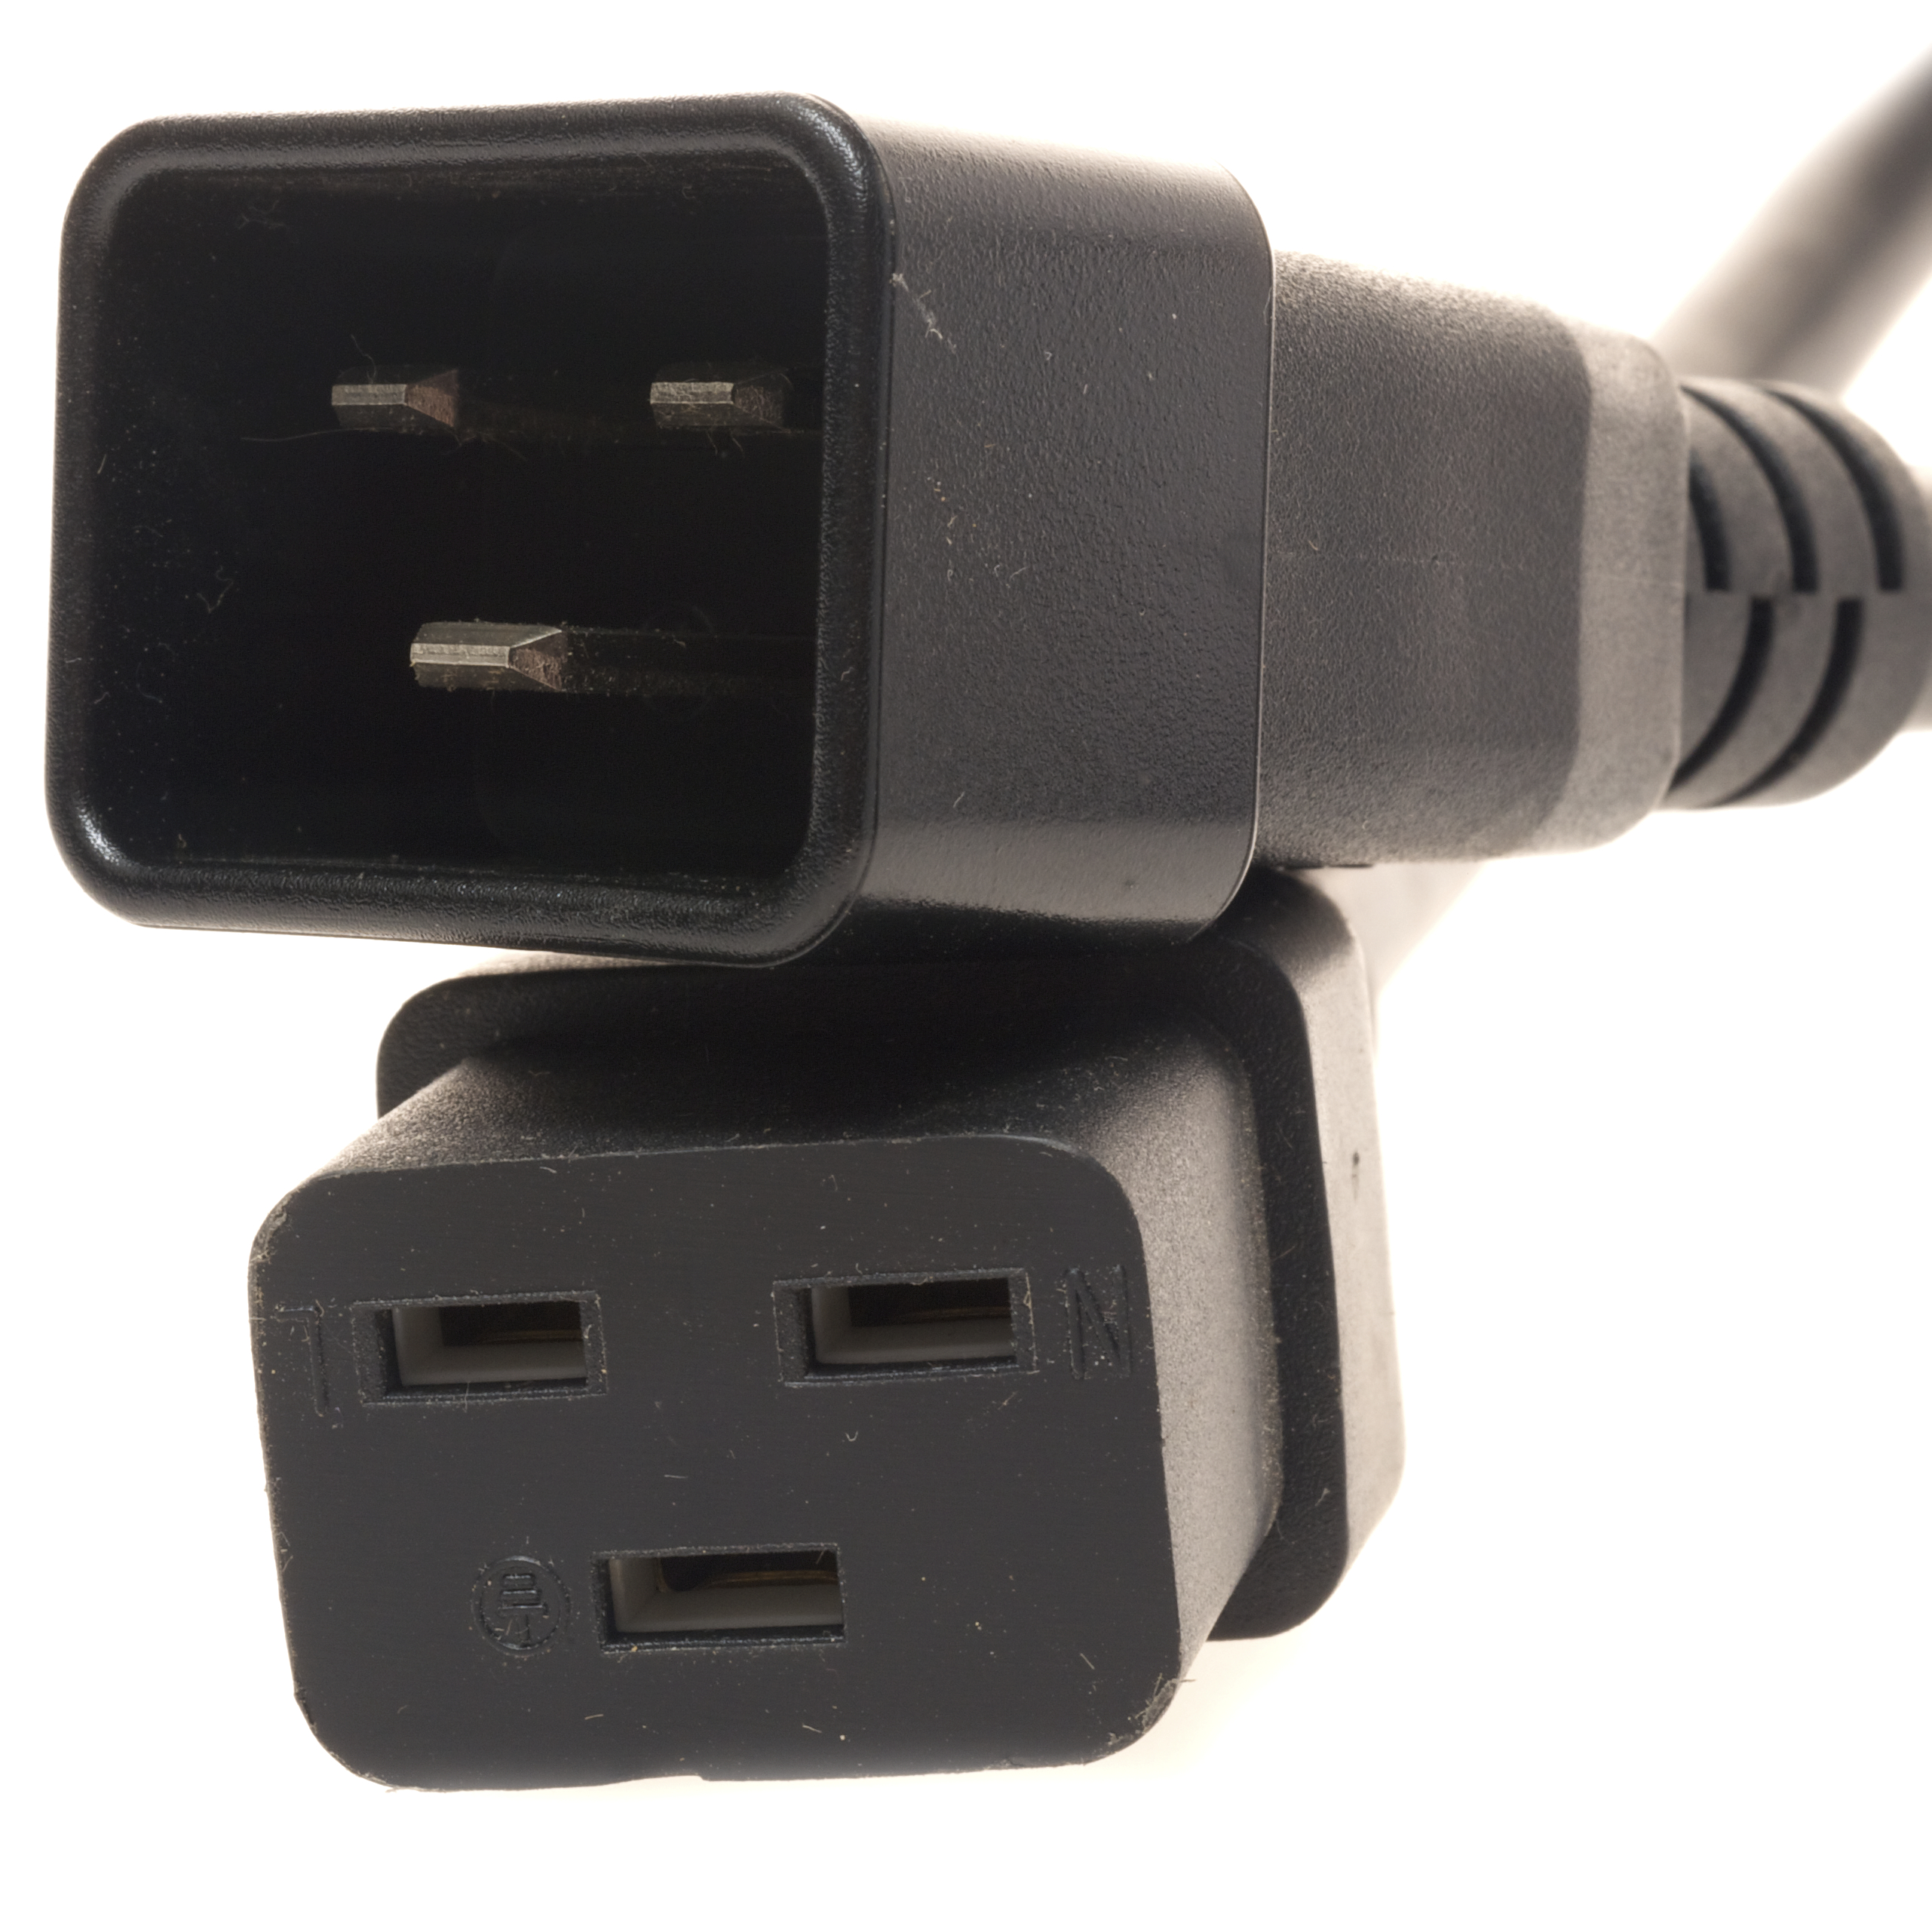 C20 To C19 Power Cords- All Colors